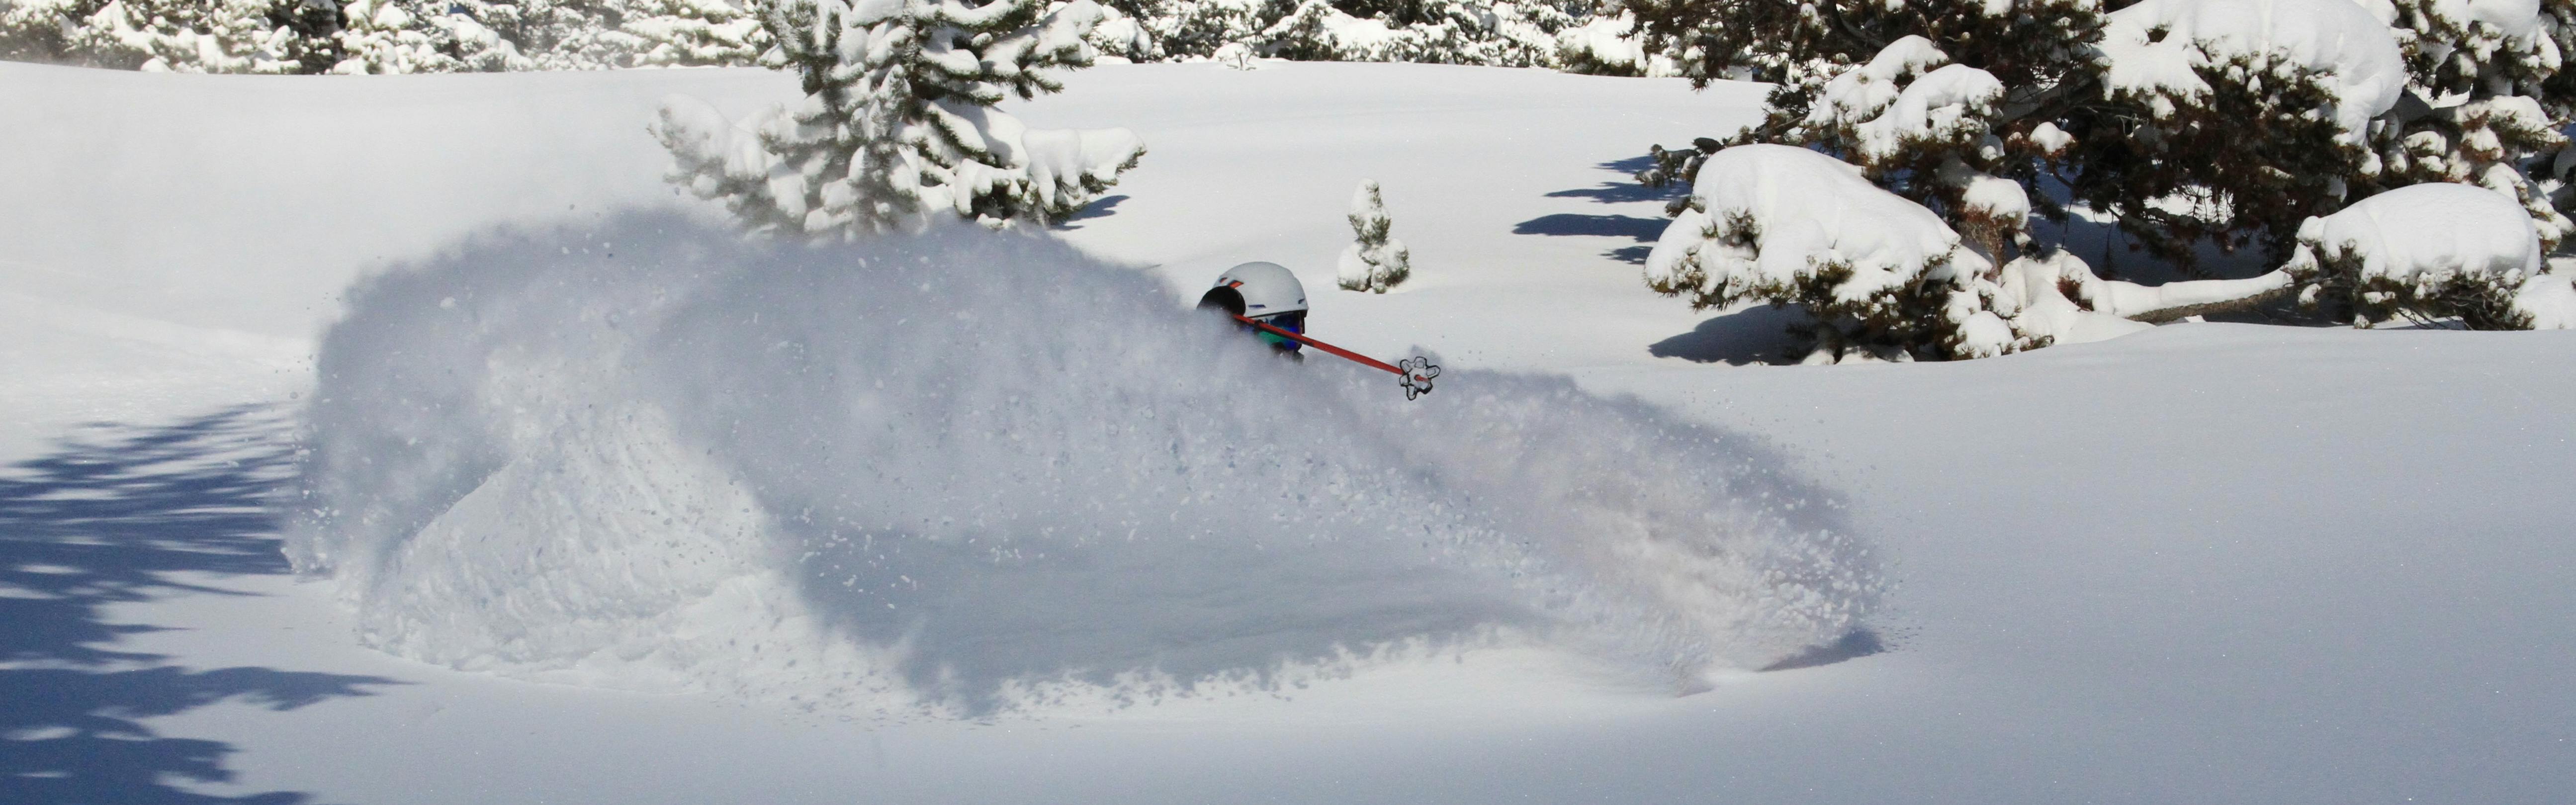 A skier riding through fresh, deep powder, sending waves of snow up from his skis